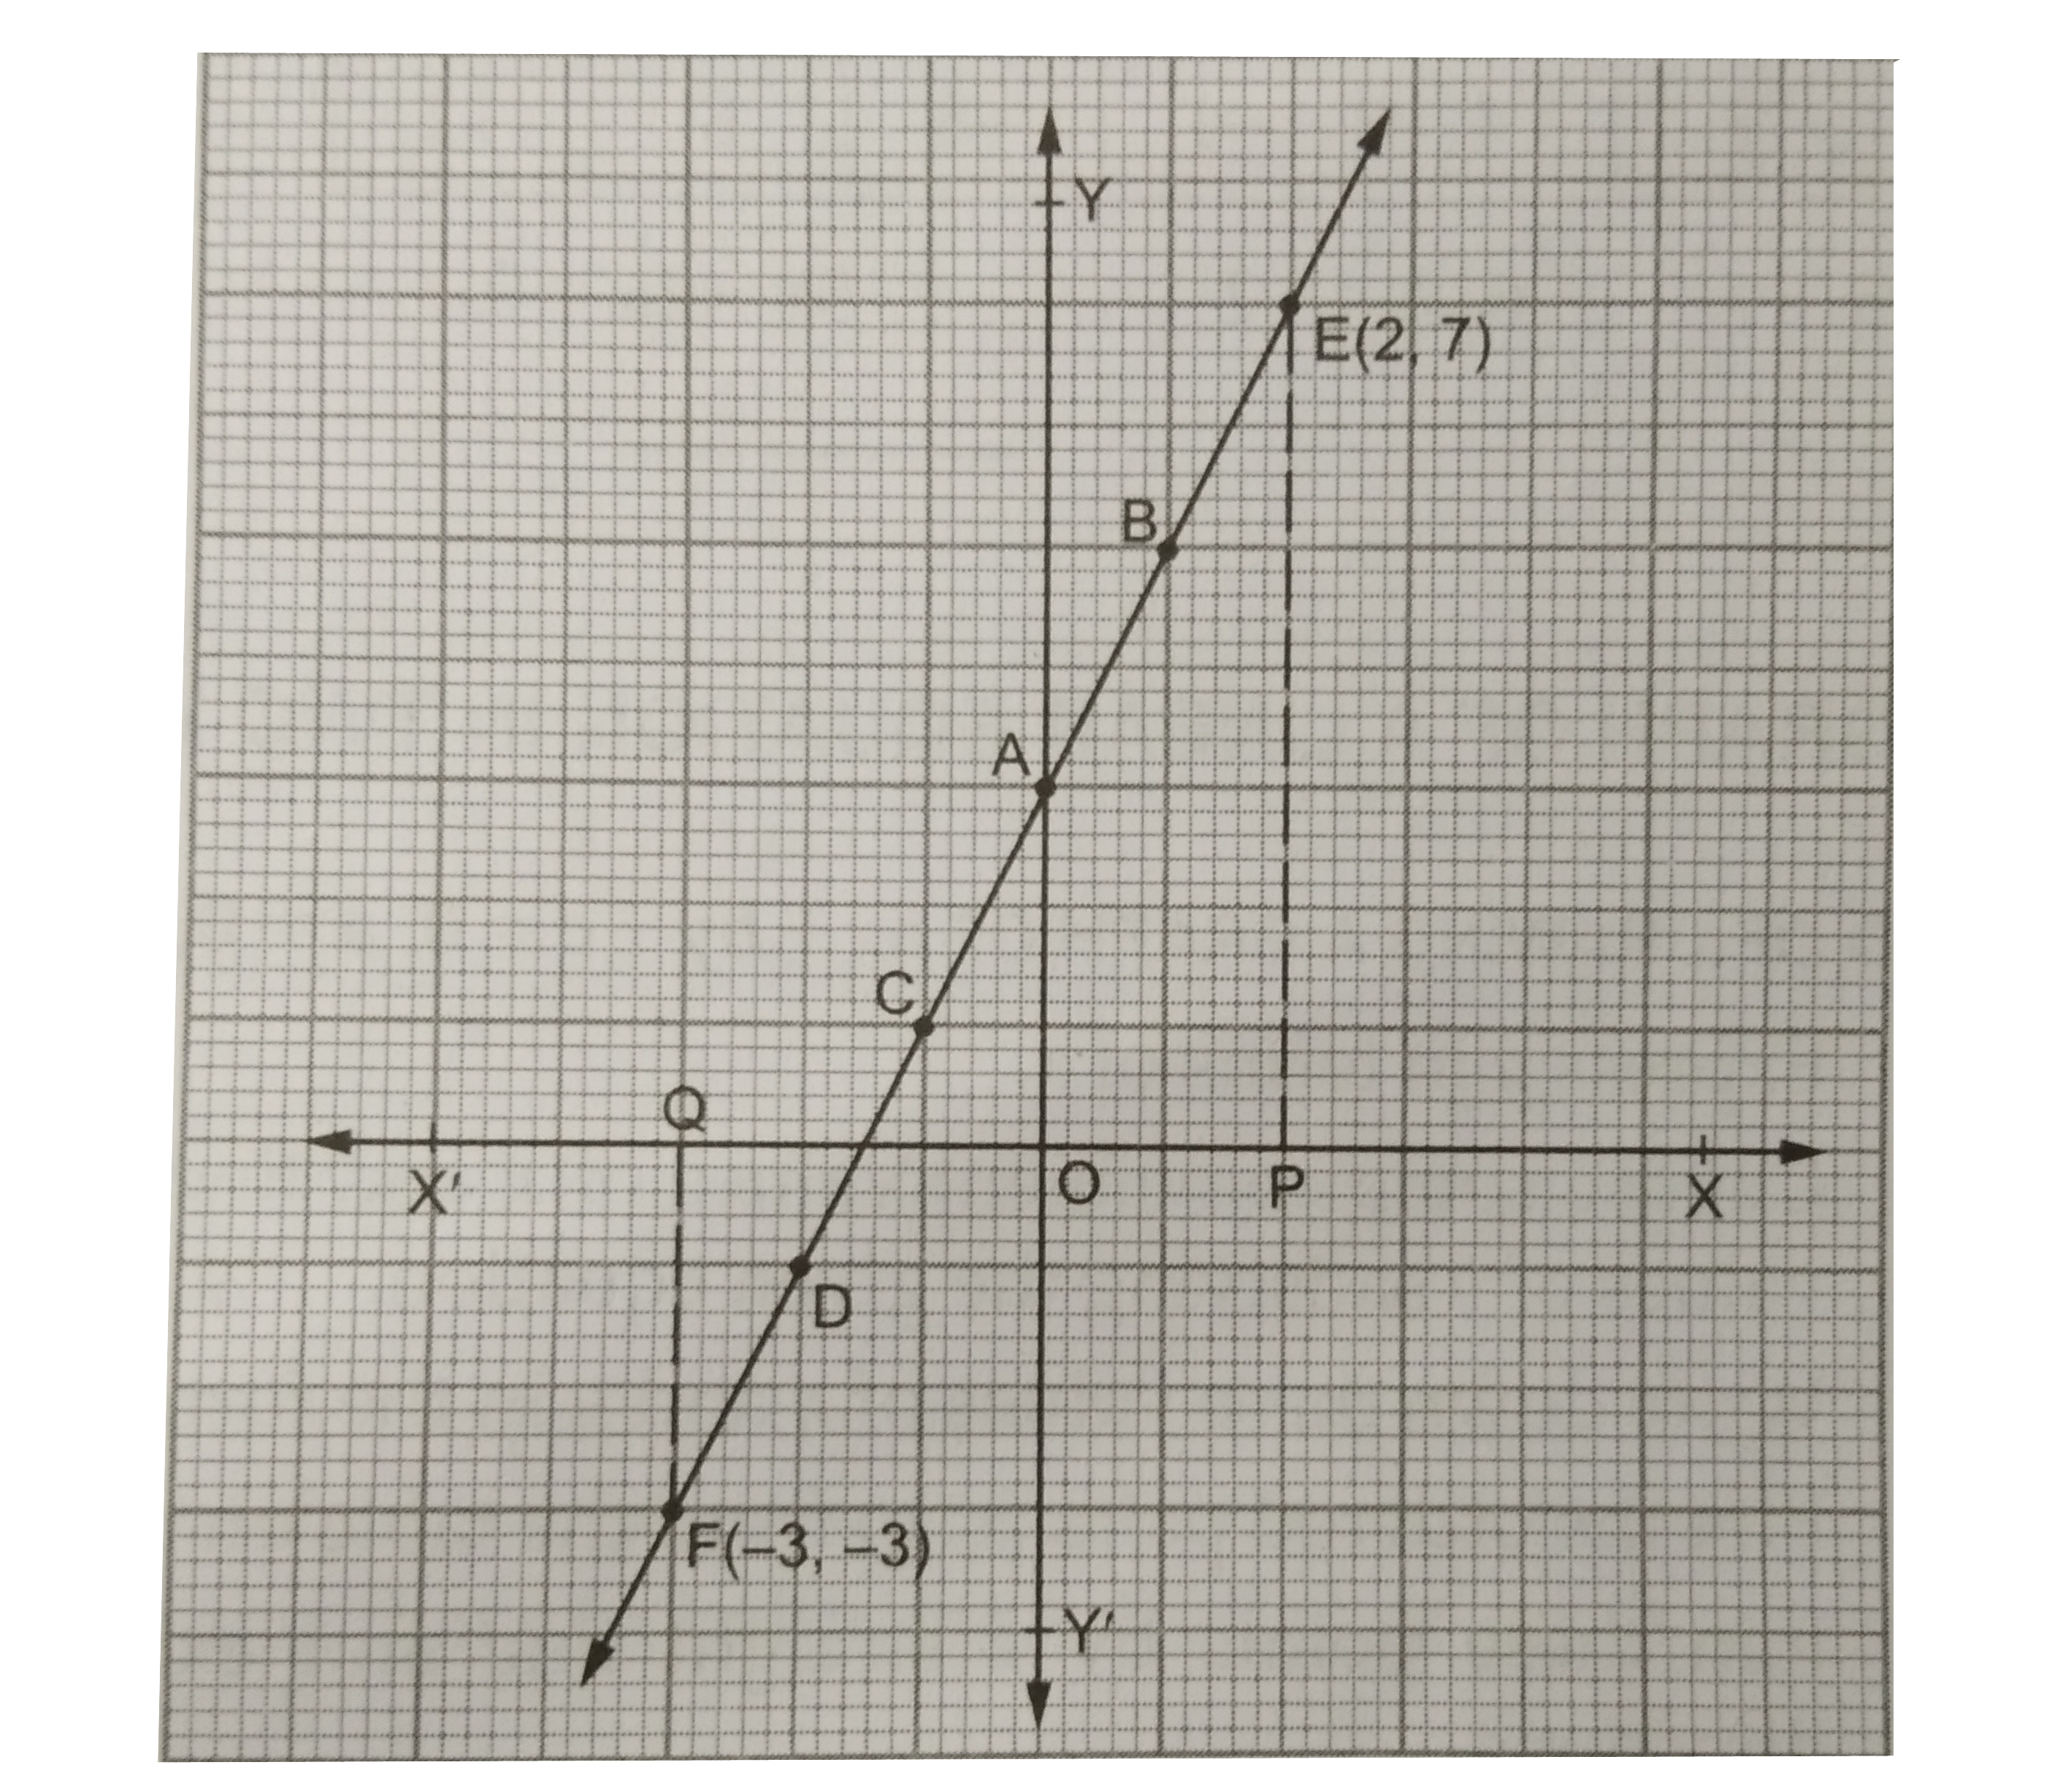 Draw The Graph Of The Equation 2x Y 3 0 Using The Graph Find The Value Of Y When A X 2 B X 3